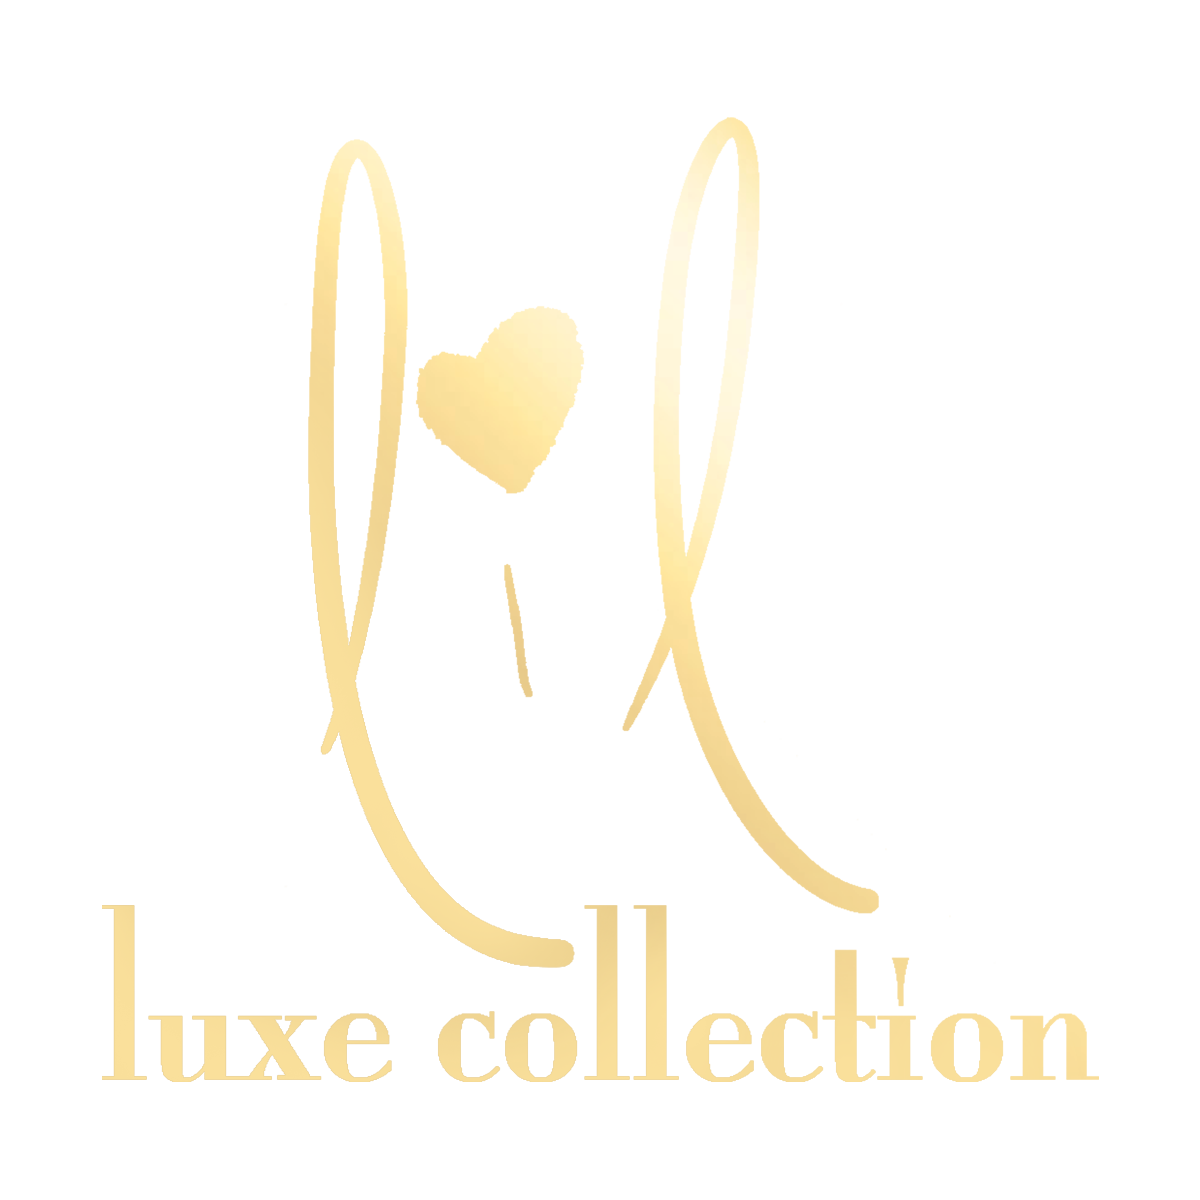 lil luxe logo.png